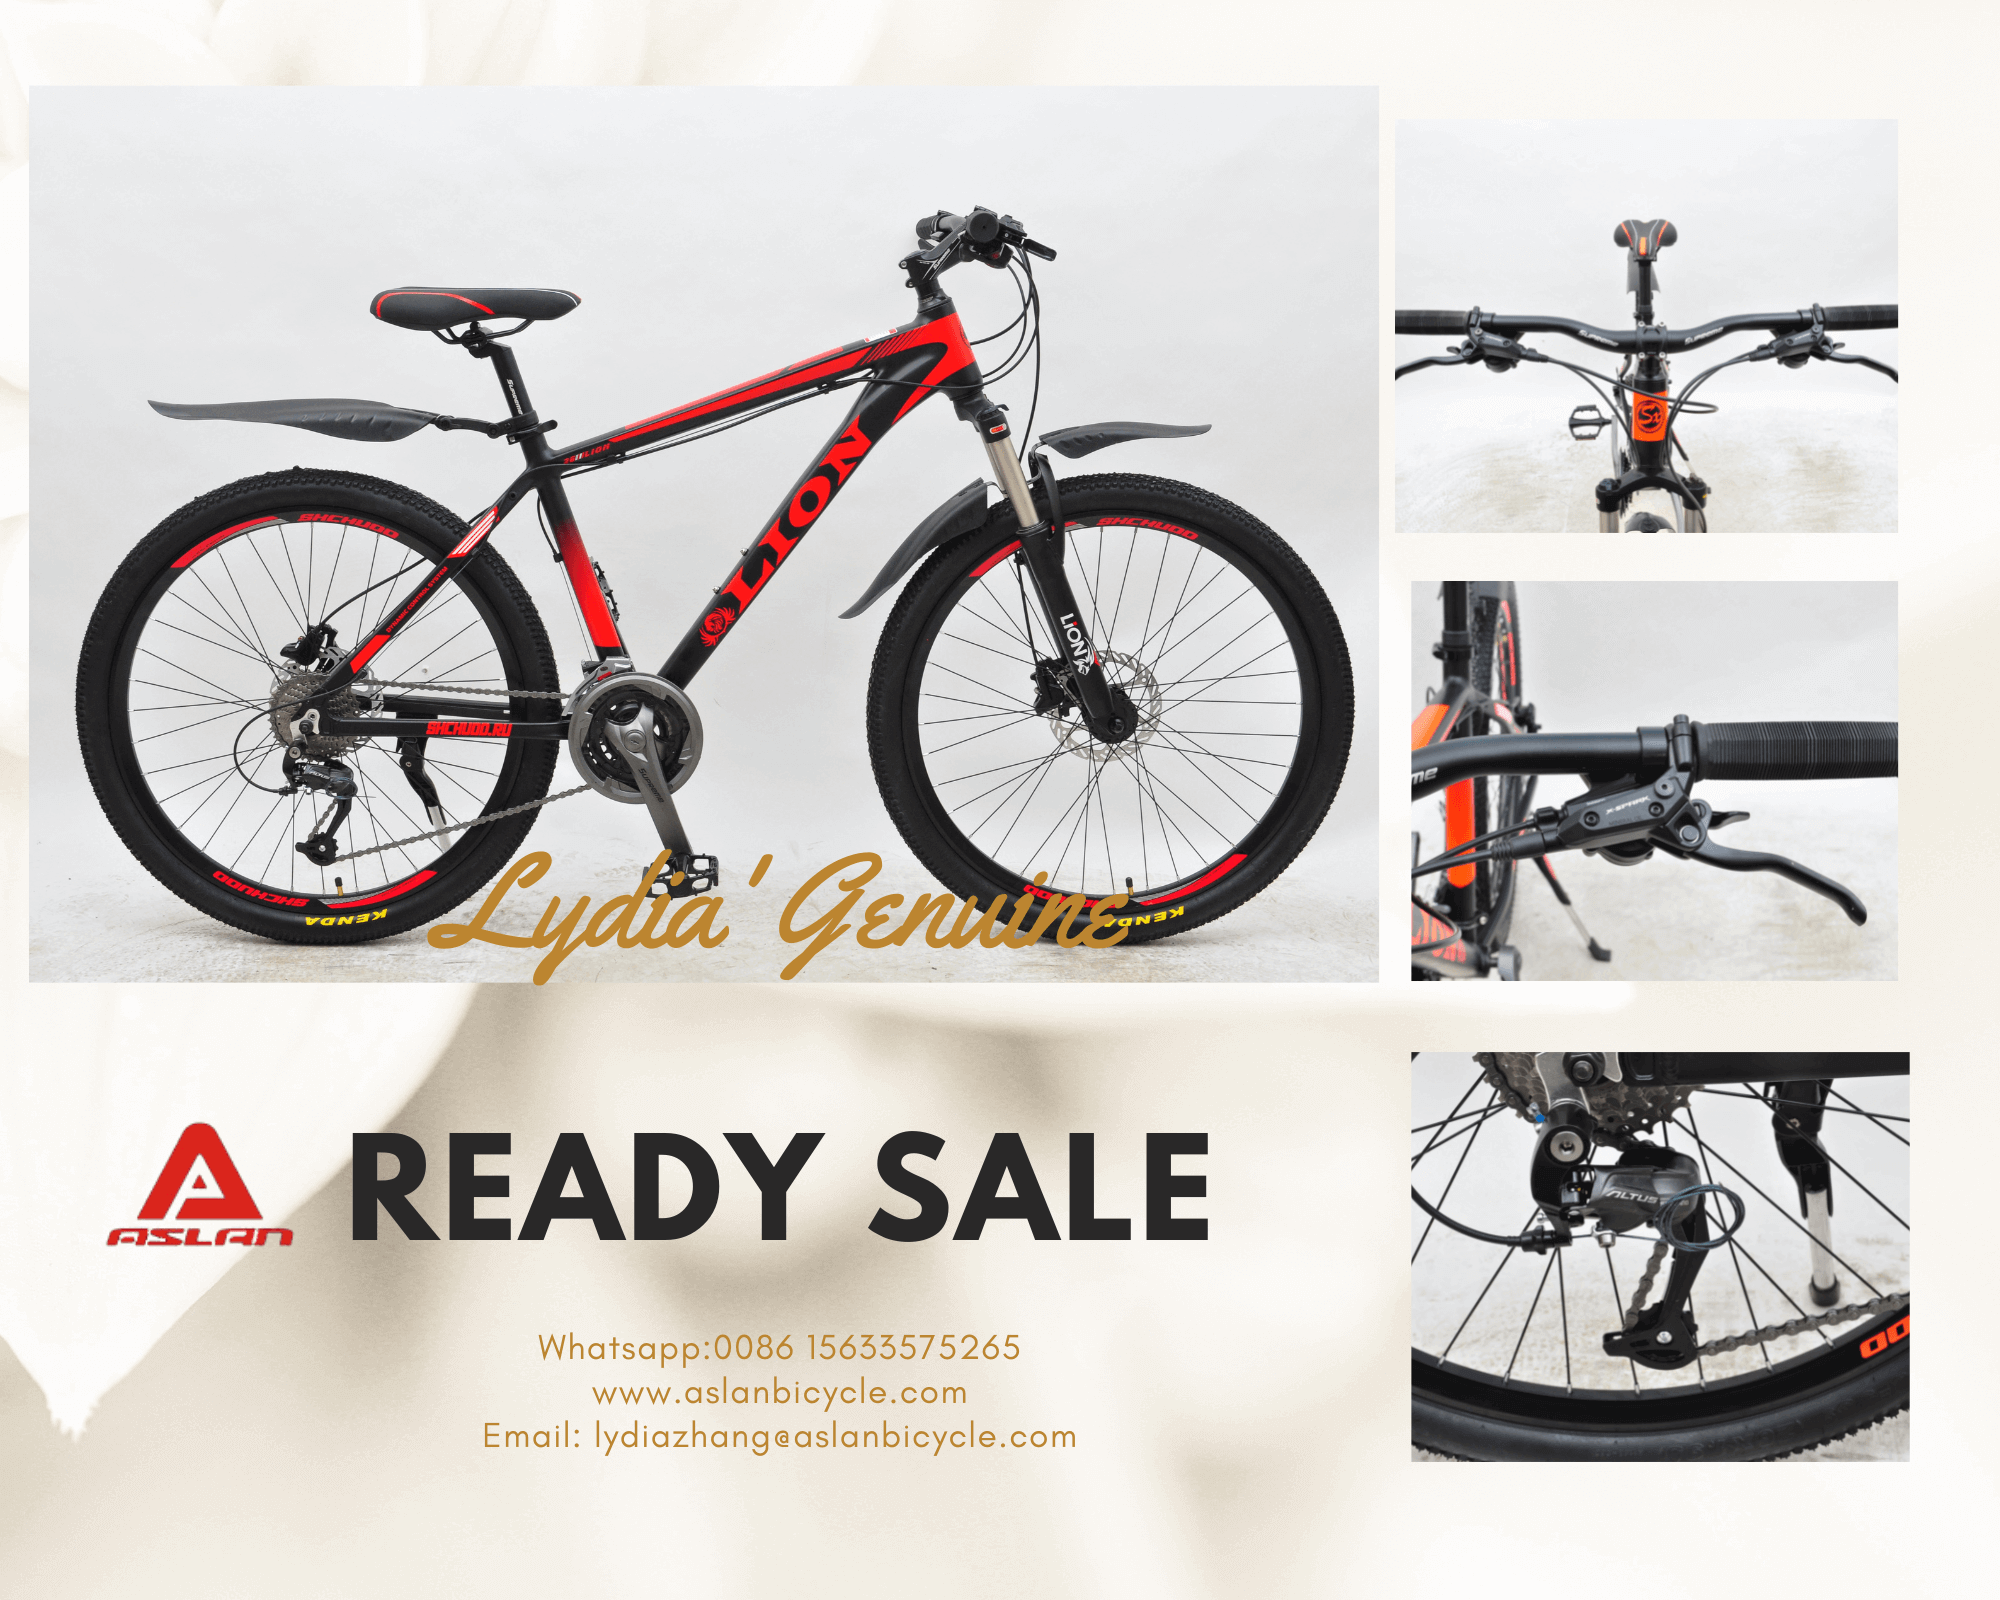 26" mountain bicycle 21speed Lion brand